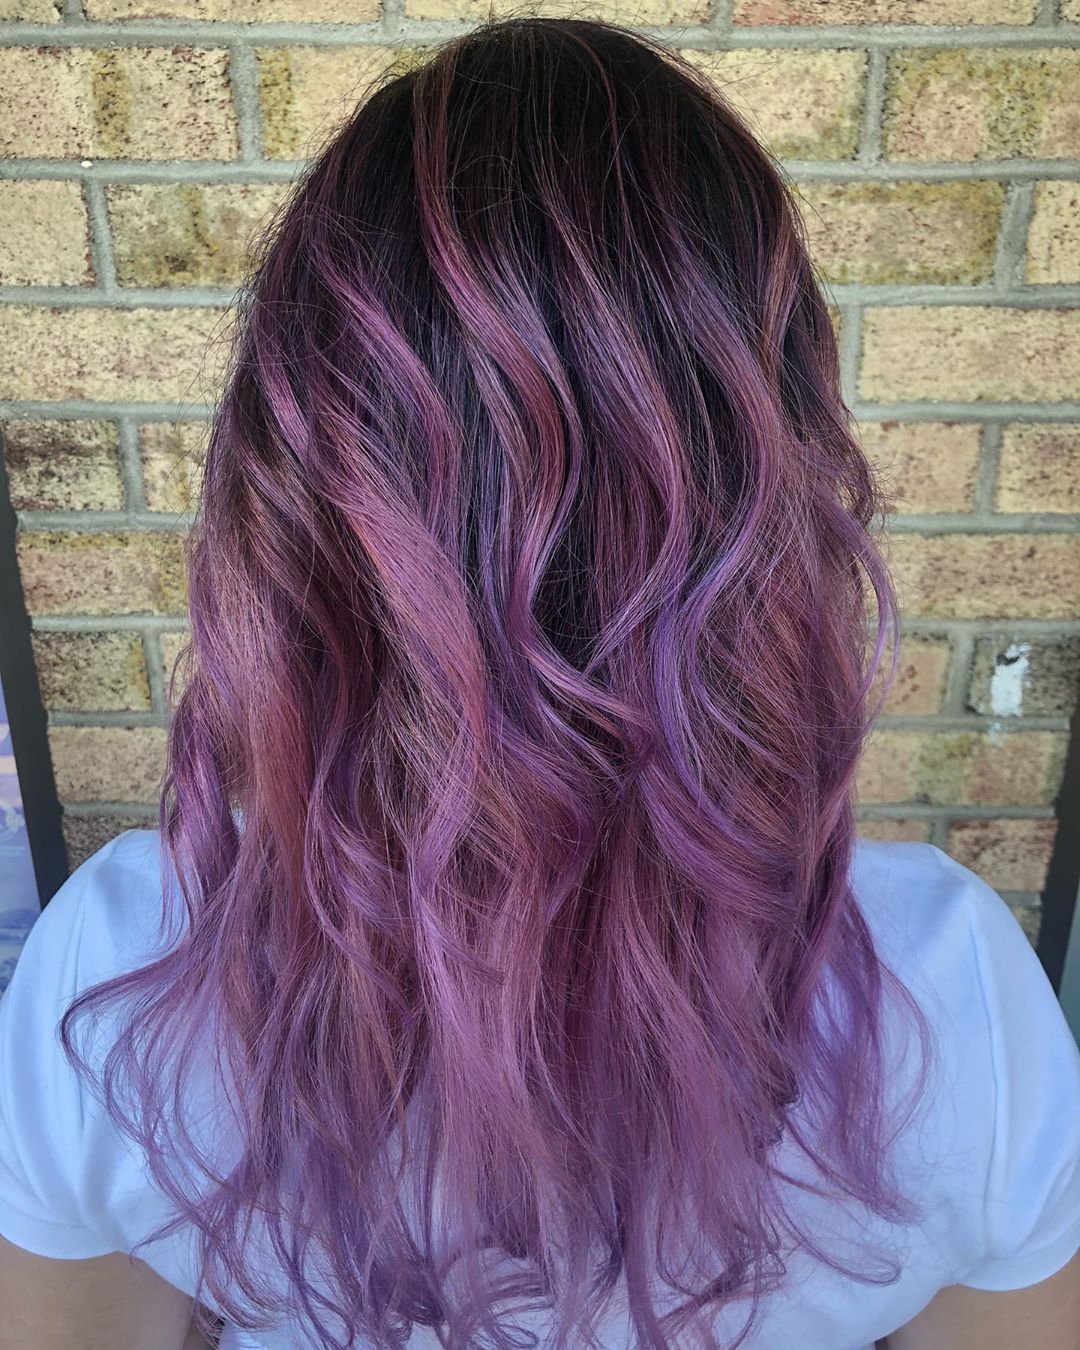 15 Pink and Purple Hair Color Ideas Trending Right Now – Hairstyles VIP